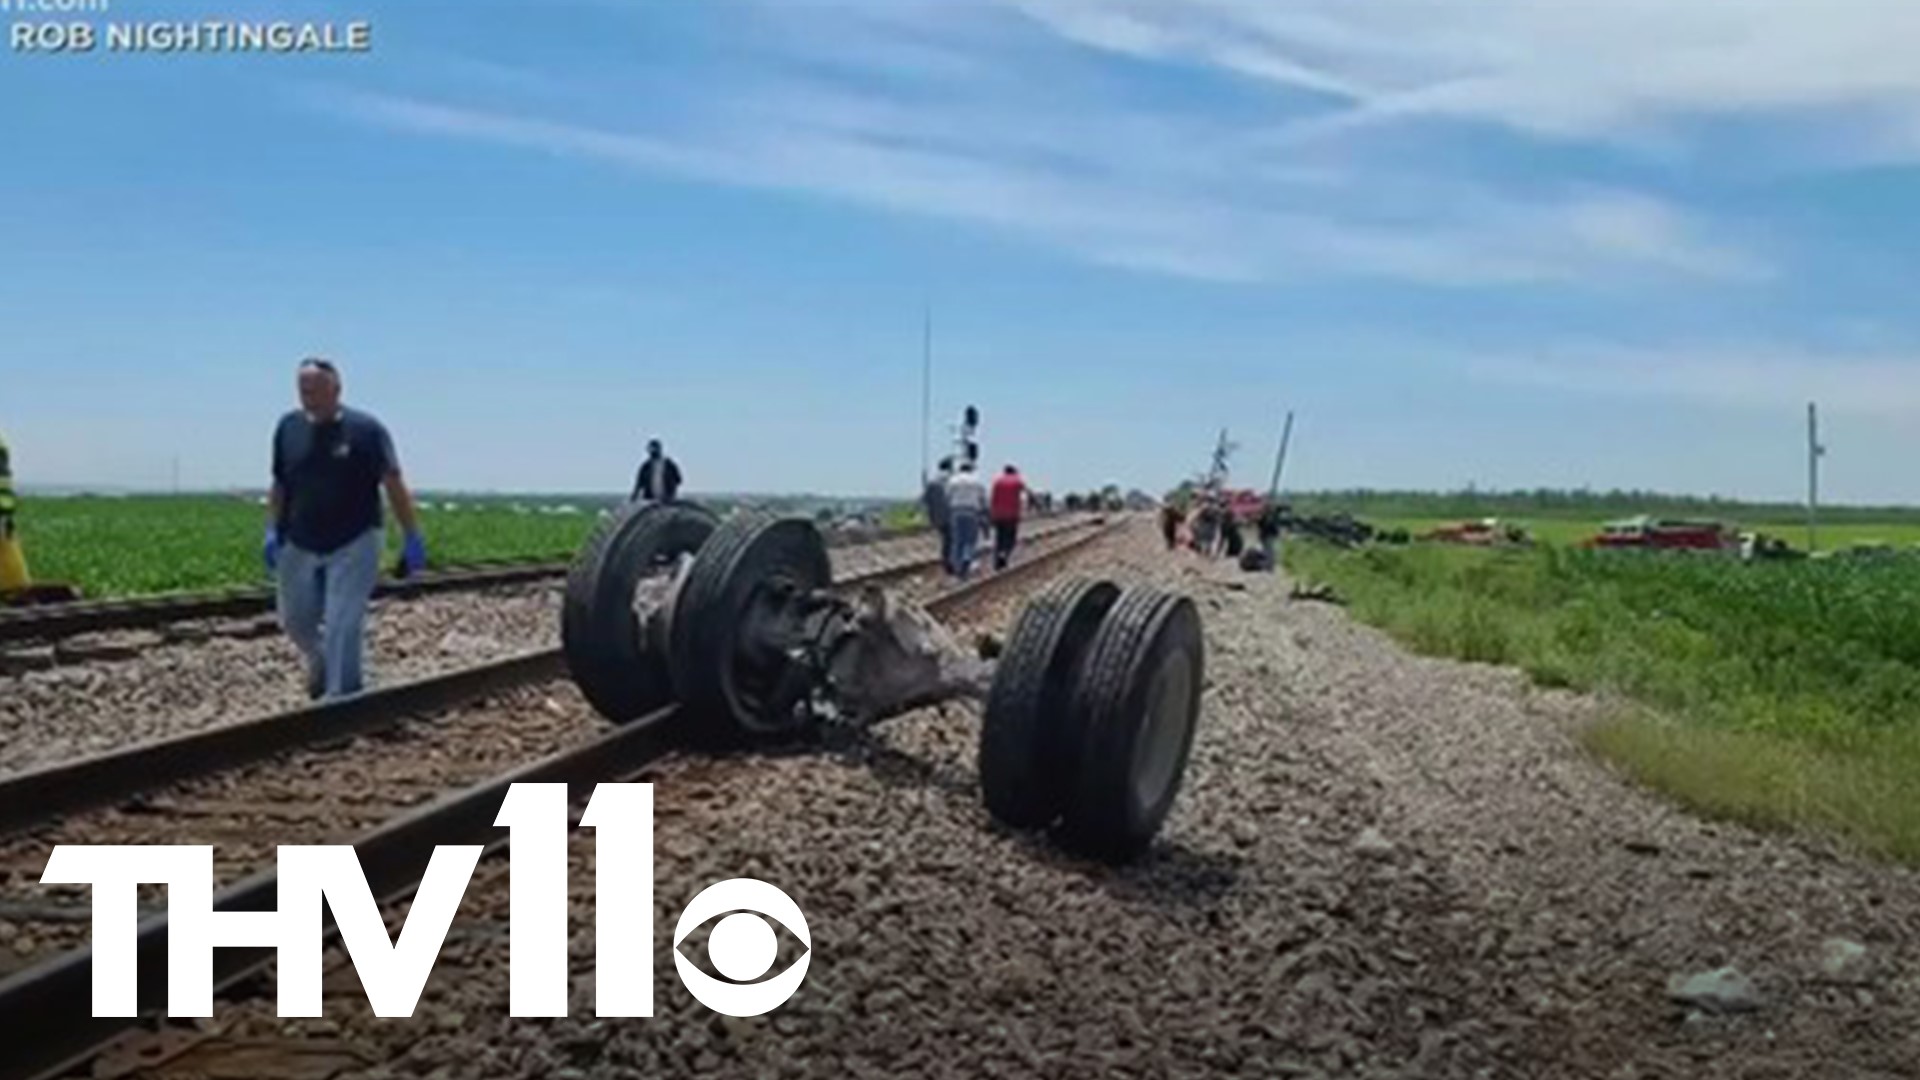 At least three people died and dozens are injured after the train hit a dump truck Monday afternoon.